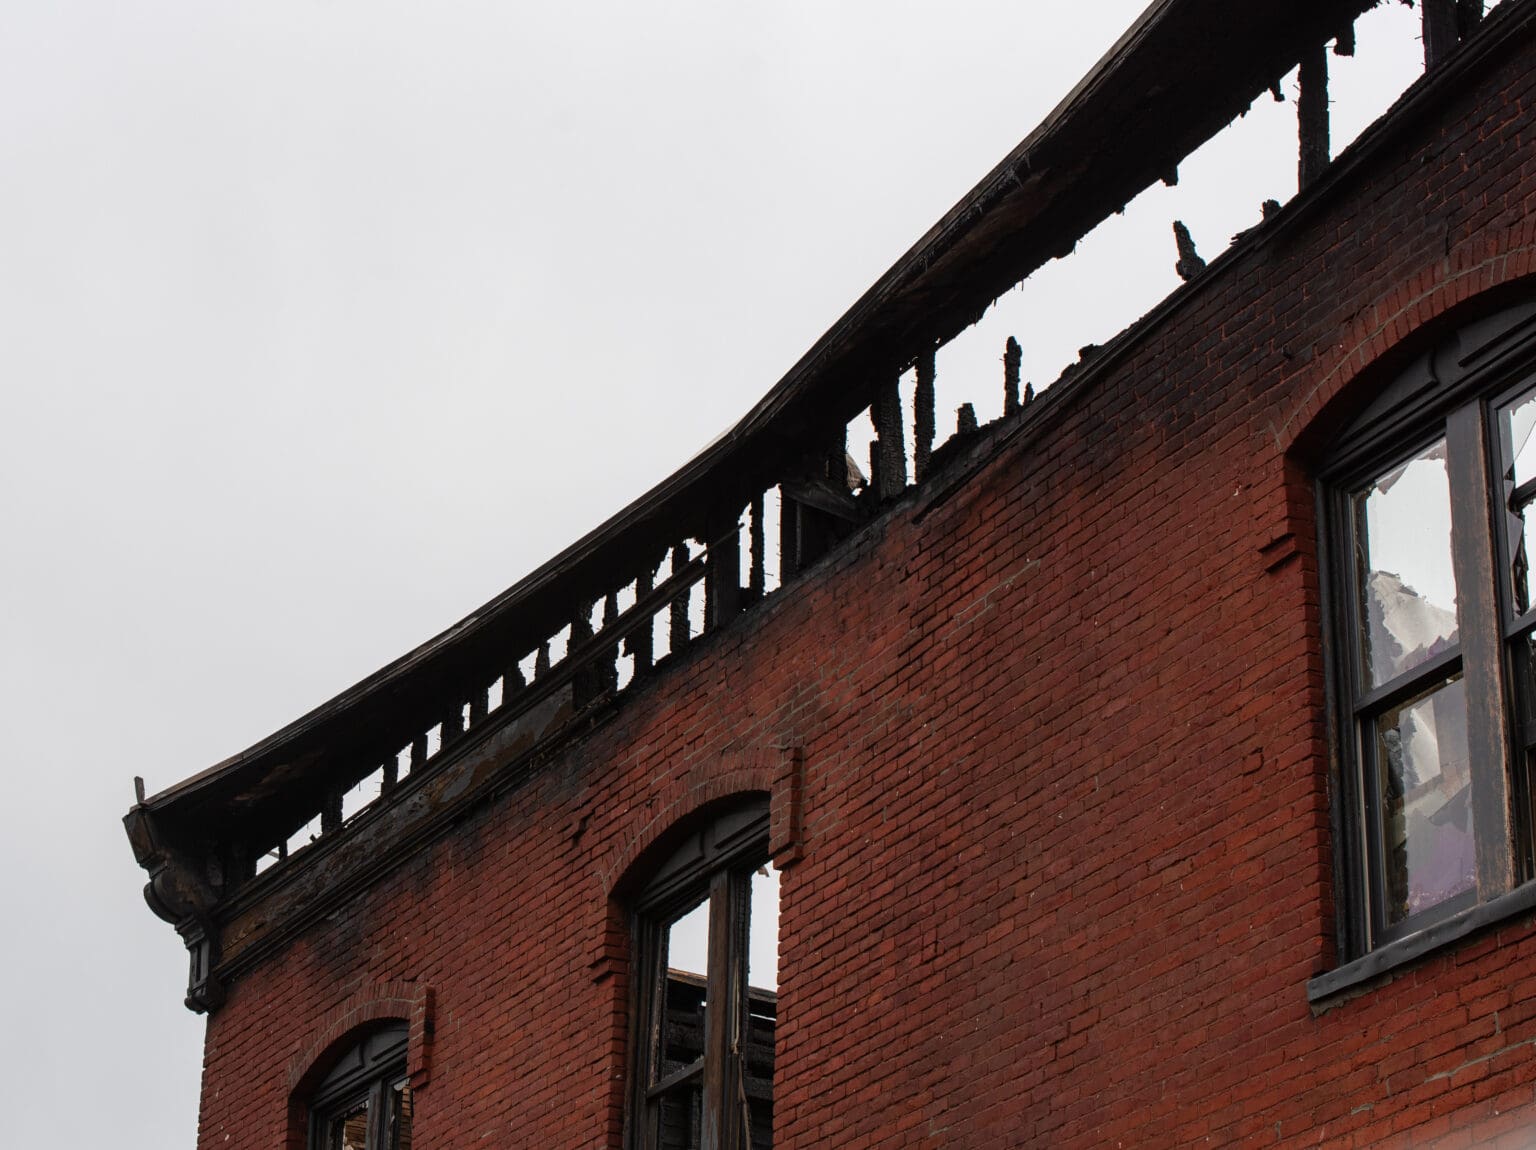 The Terminal Building eaves were burnt out in a fire that started Saturday night